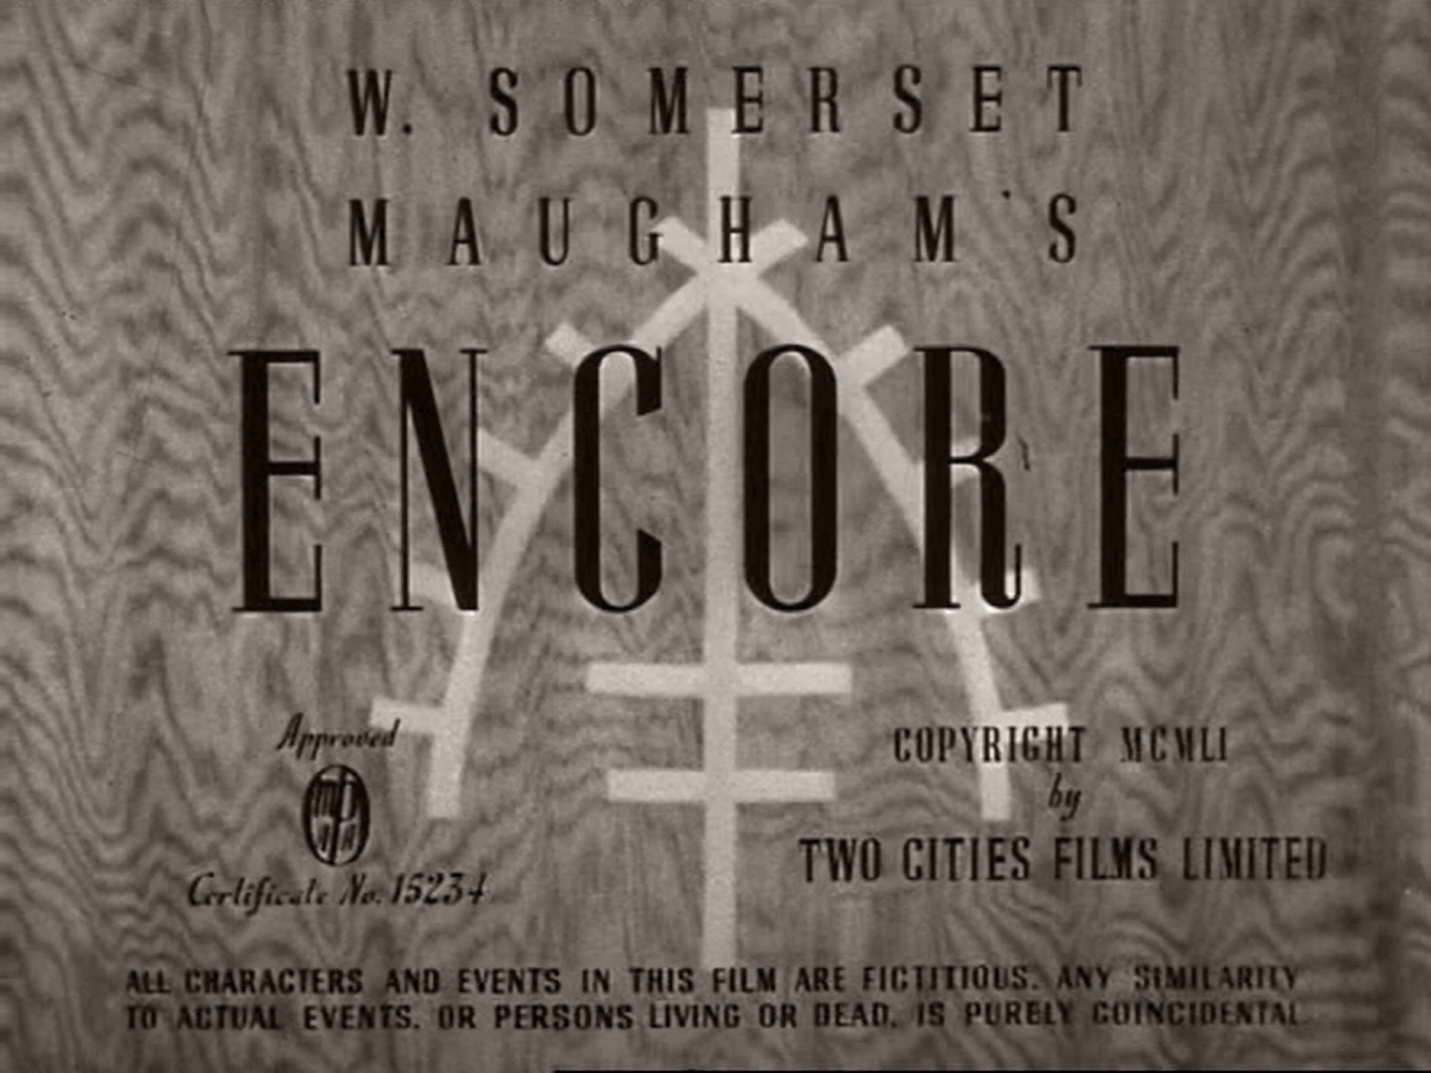 Main title from Encore (1951) (1).  W Somerset Maugham’s Encore.  Copyright 1951 by Two Cities Films Limited